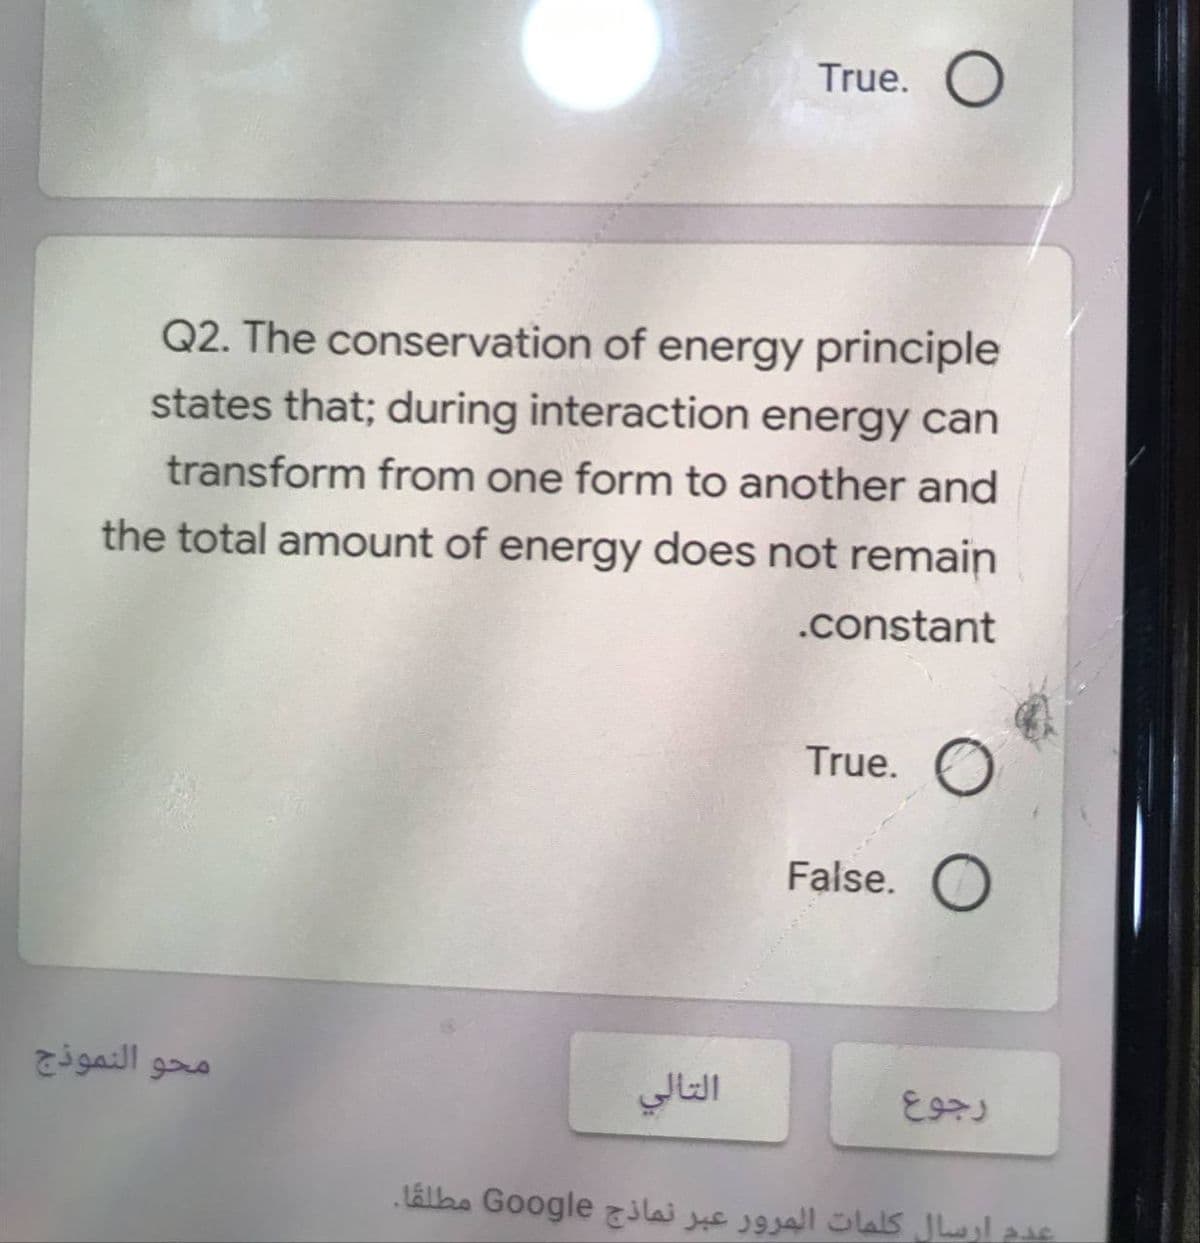 True. O
Q2. The conservation of energy principle
states that; during interaction energy can
transform from one form to another and
the total amount of energy does not remain
.constant
True. O
False. O
محو النموذج
التالي
عدم ارسال كلمات المرور عبر نماذج Go ogle مطلقا.
